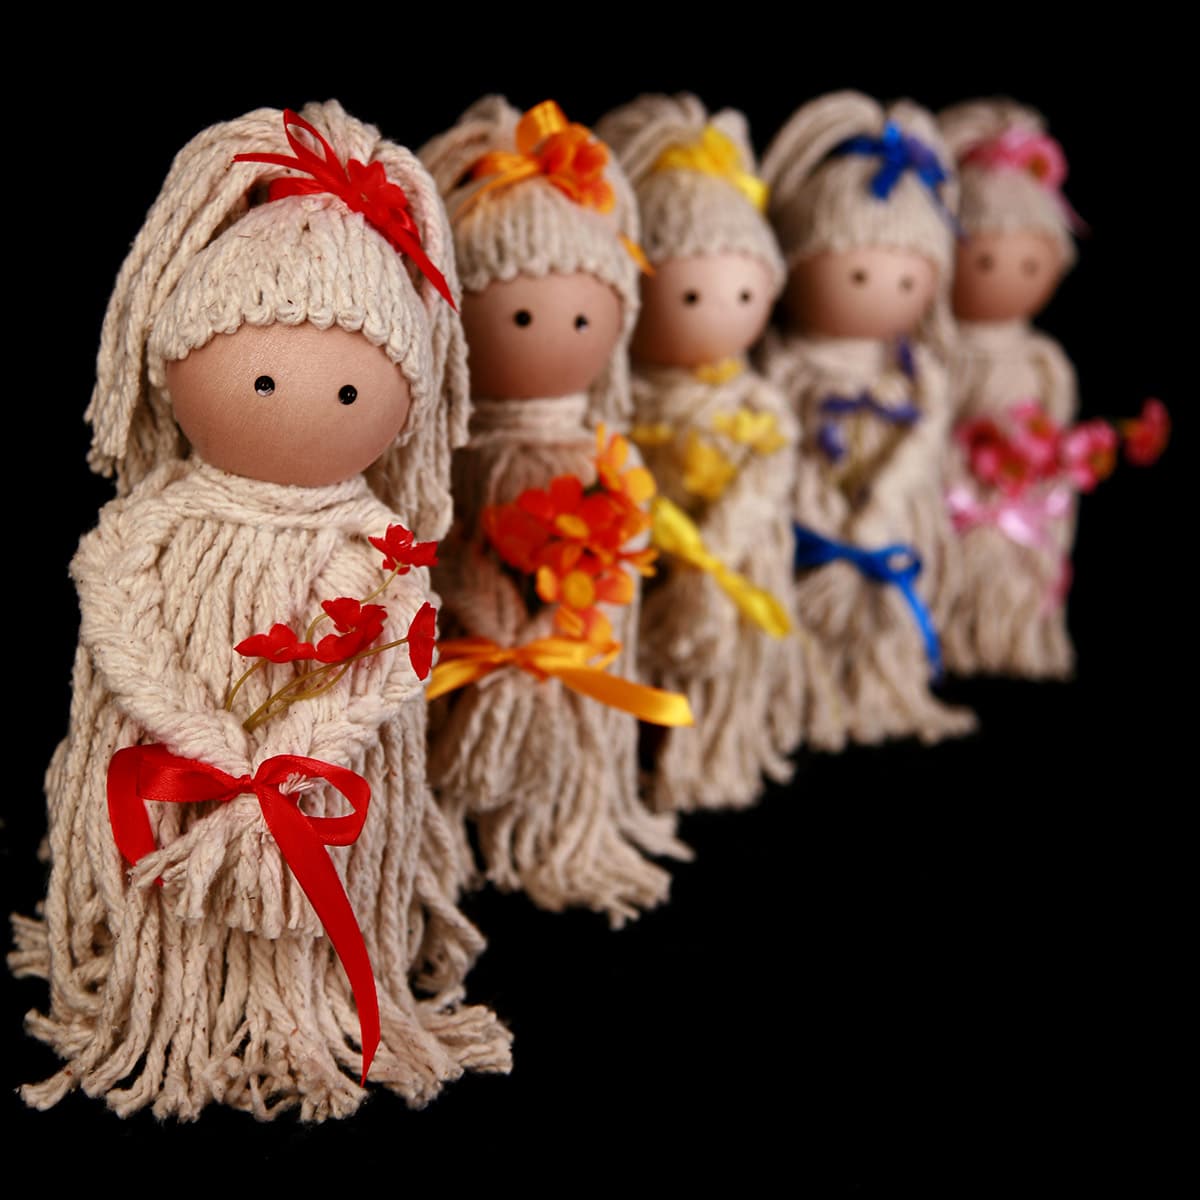 5 finished Mop Doll Air Fresheners in a row